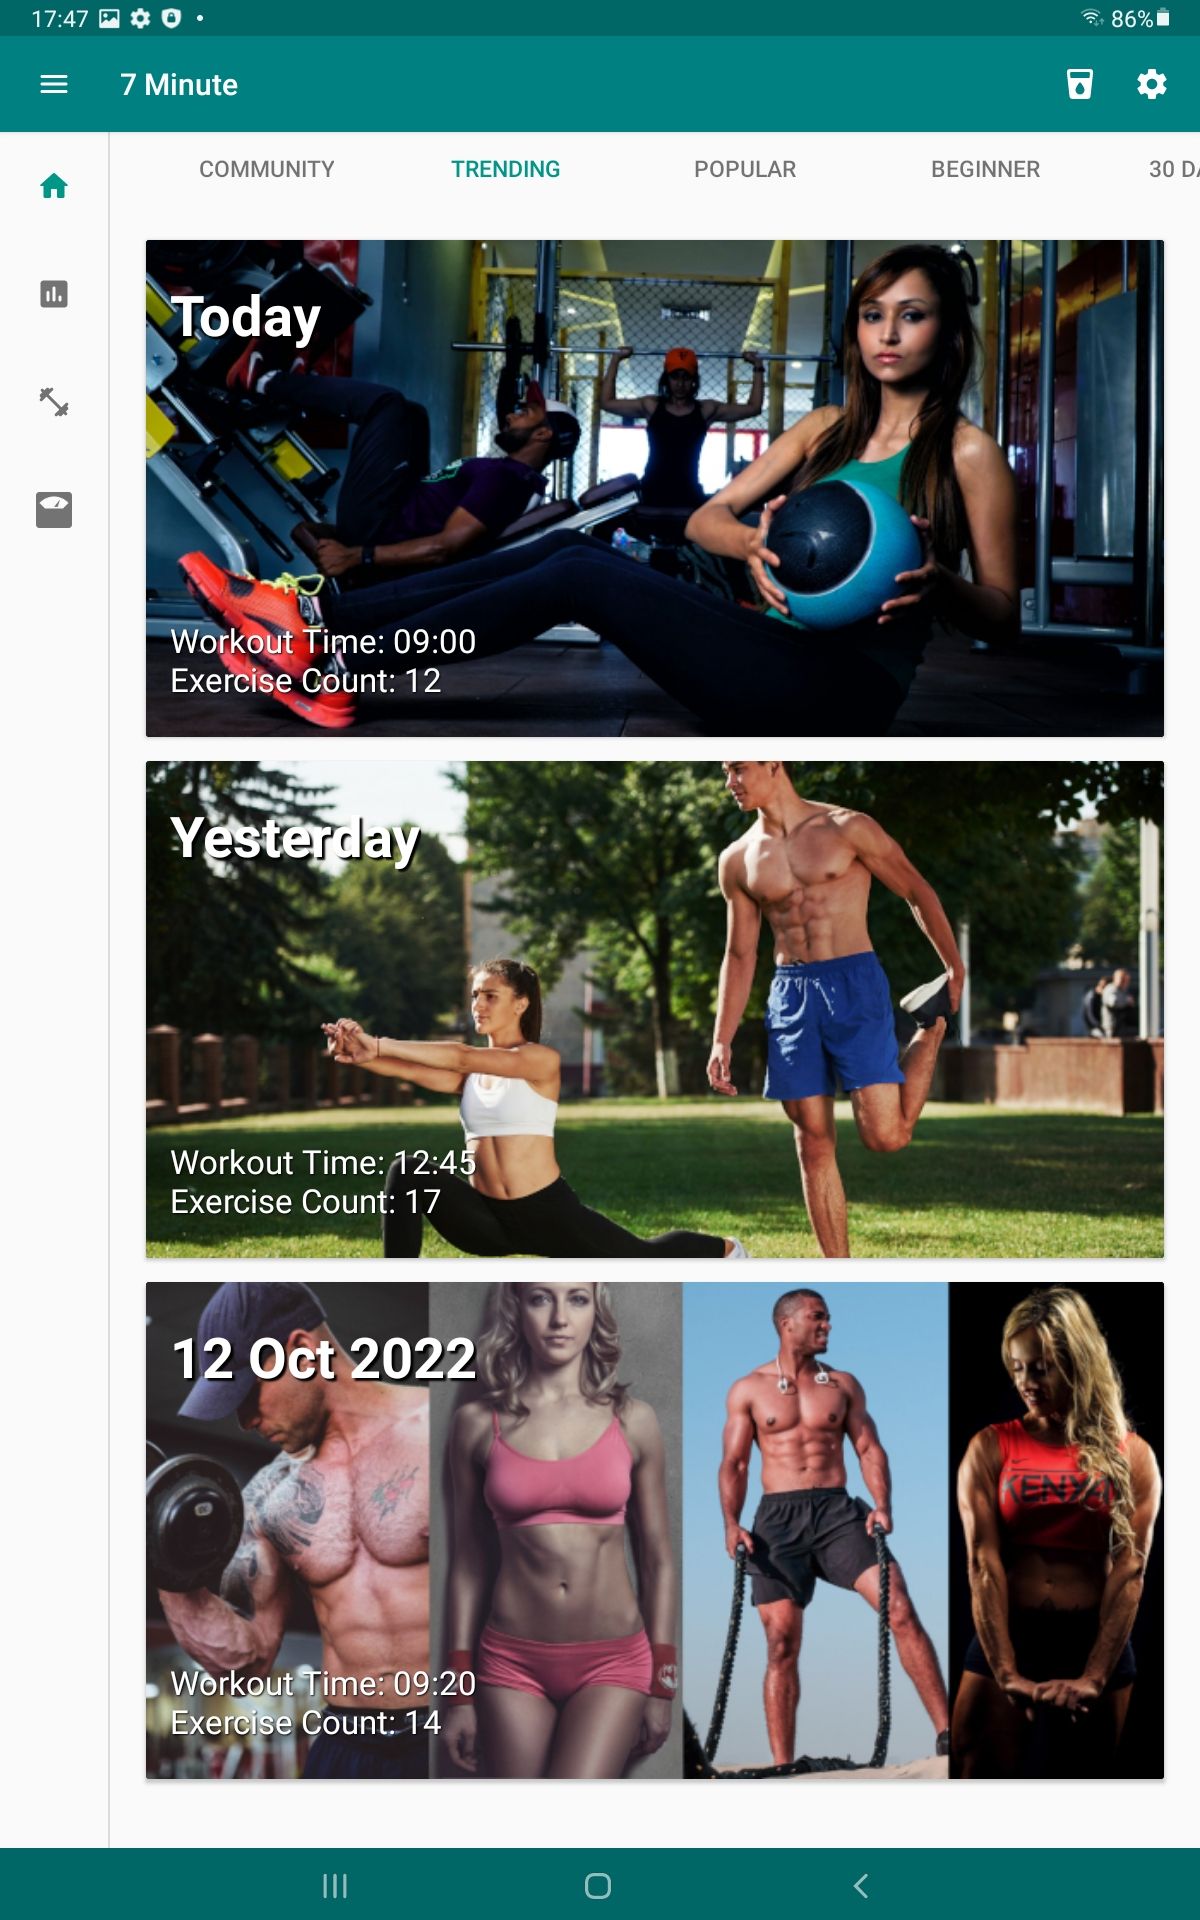 Can't go to the gym? Check out these 7 hot fitness apps